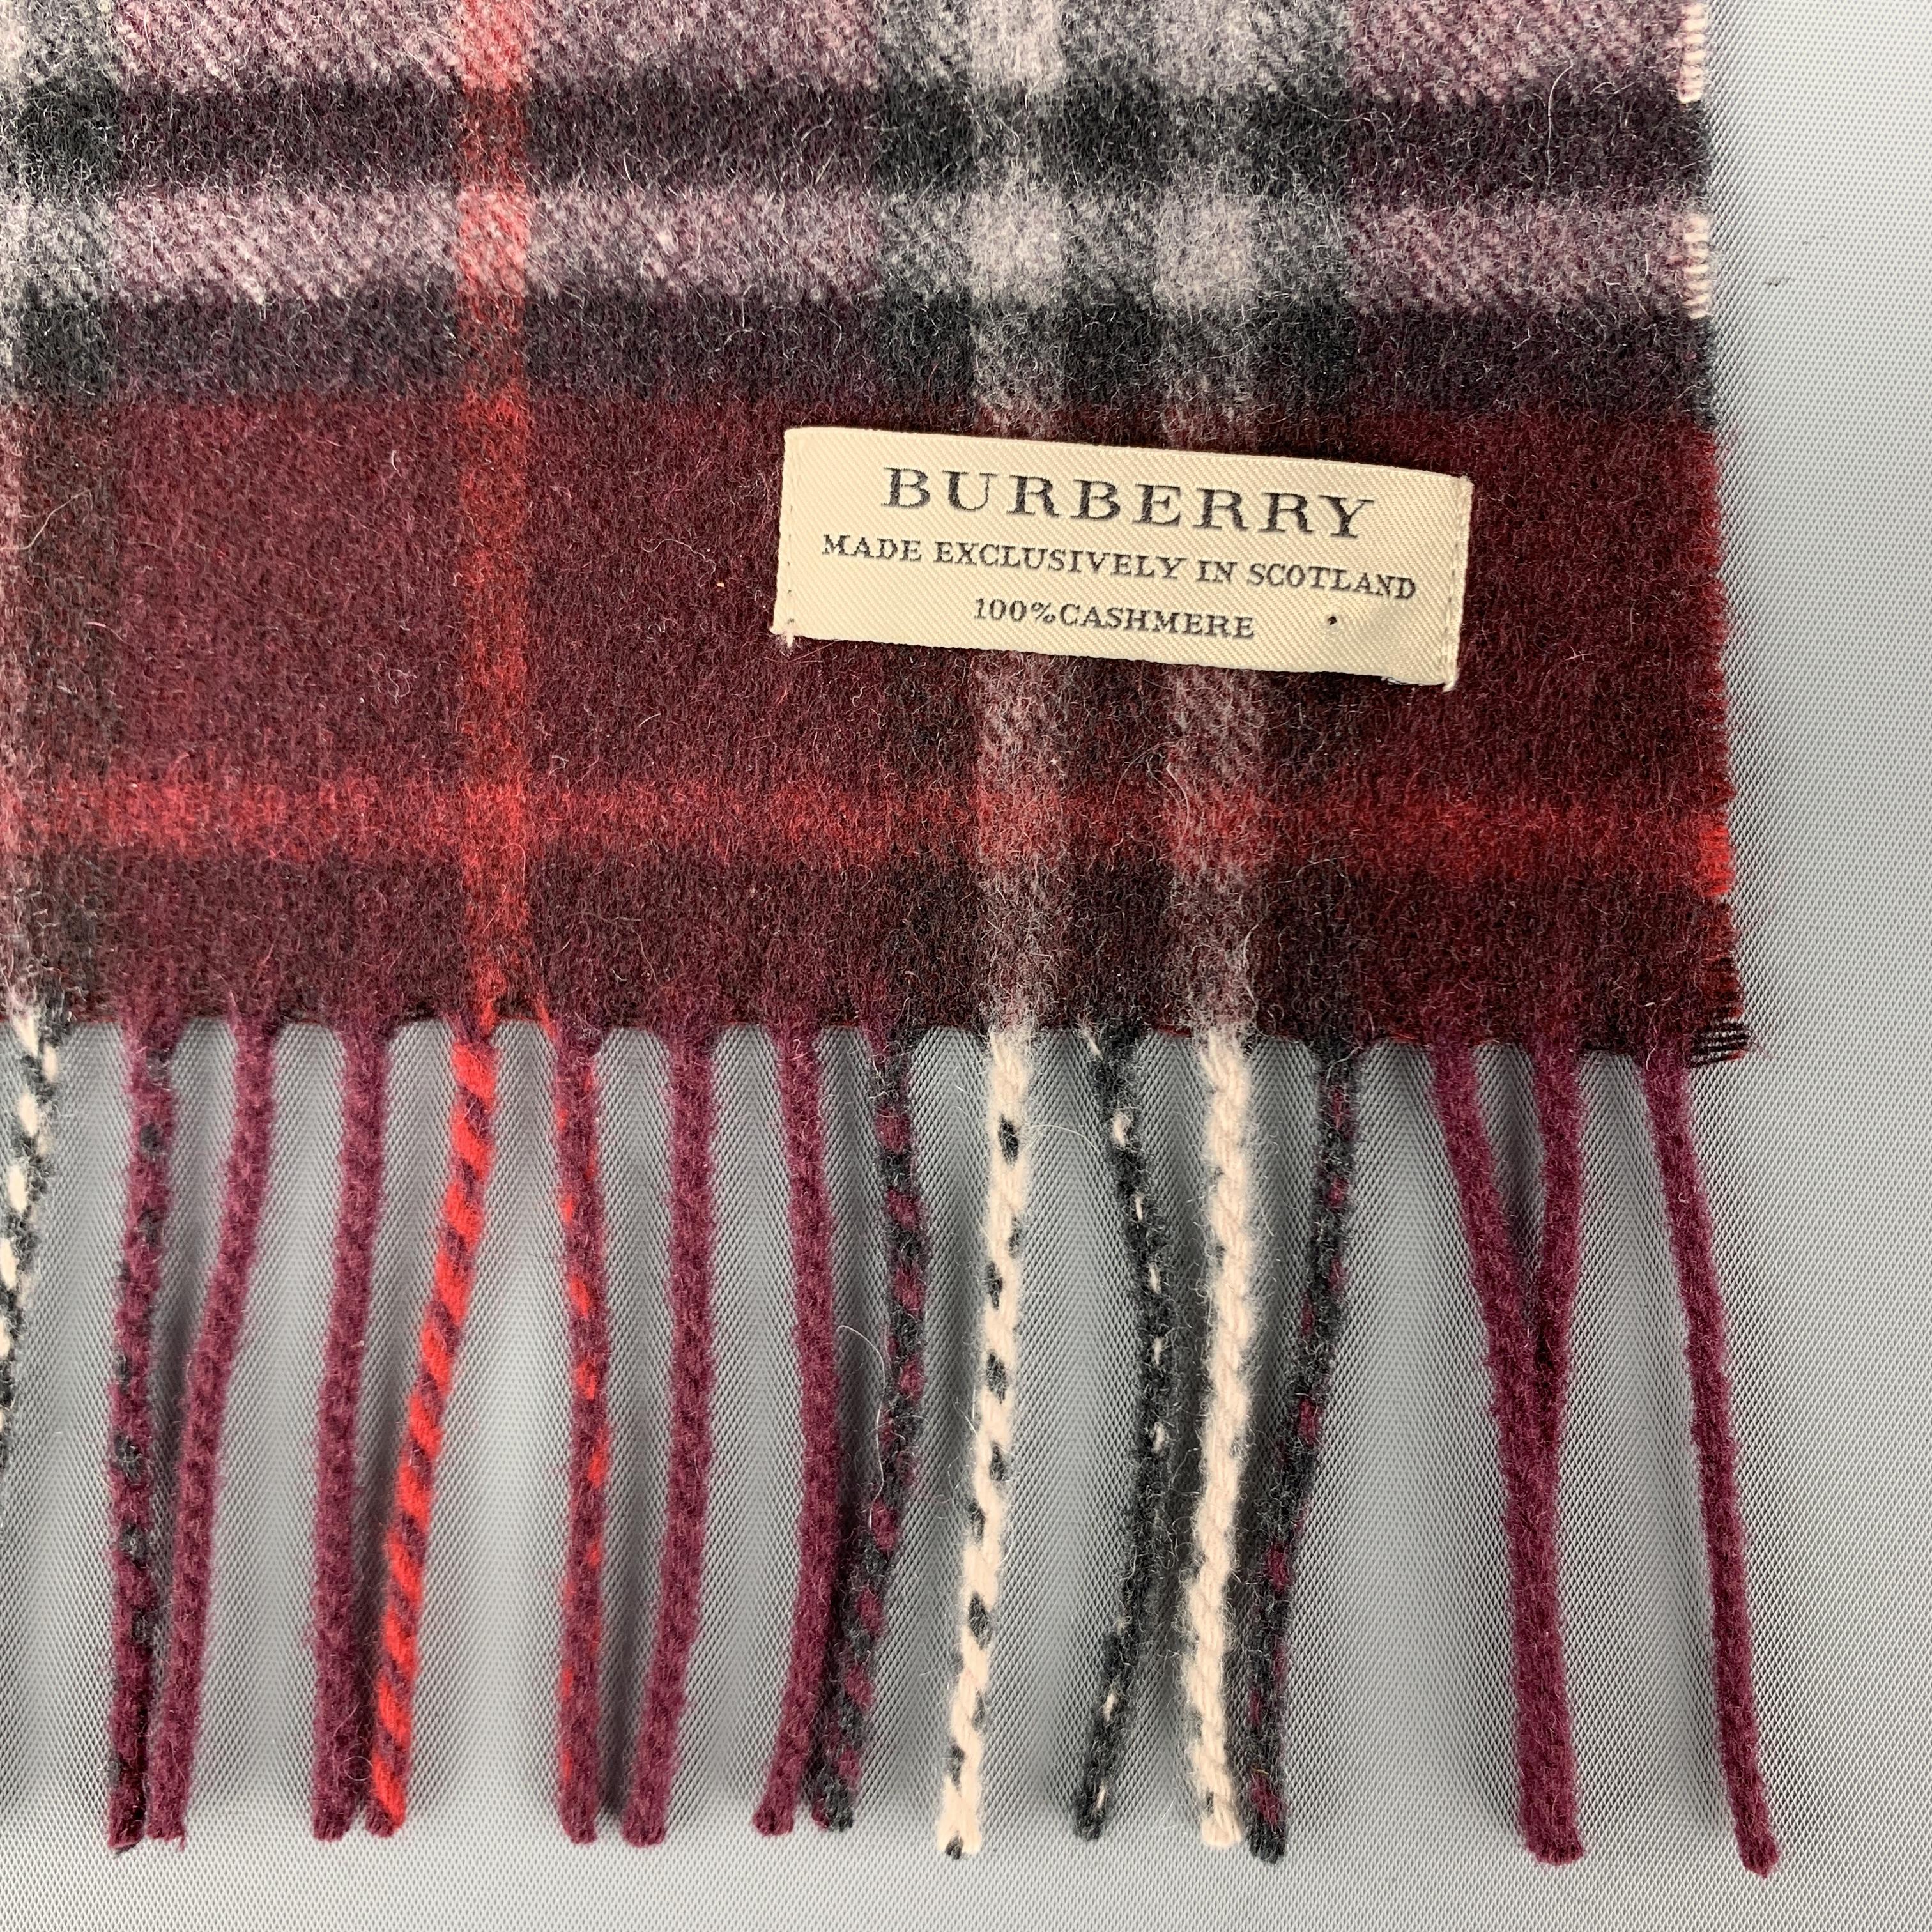 BURBERRY Scarf comes in a plaid burgundy cashmere, featuring raw hem and fringes. Made in Scotland. 

Excellent Pre-Owned Conditions.

Measurements:

70 x 12 in. 